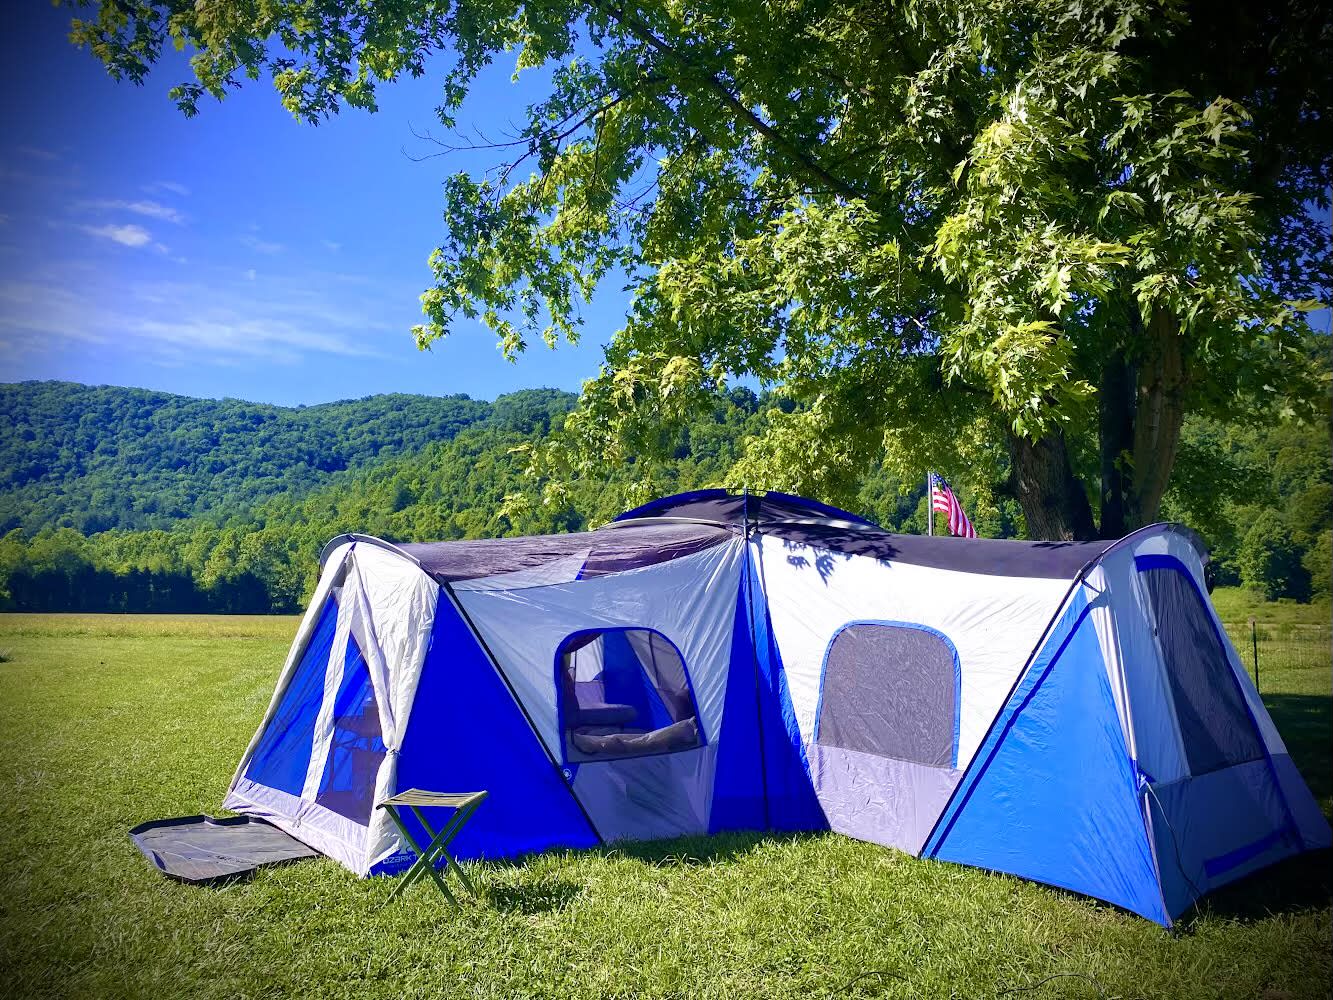 Beautiful tent camping in a canopy of timber next to spring fed streams, or in open pasture with views galore!